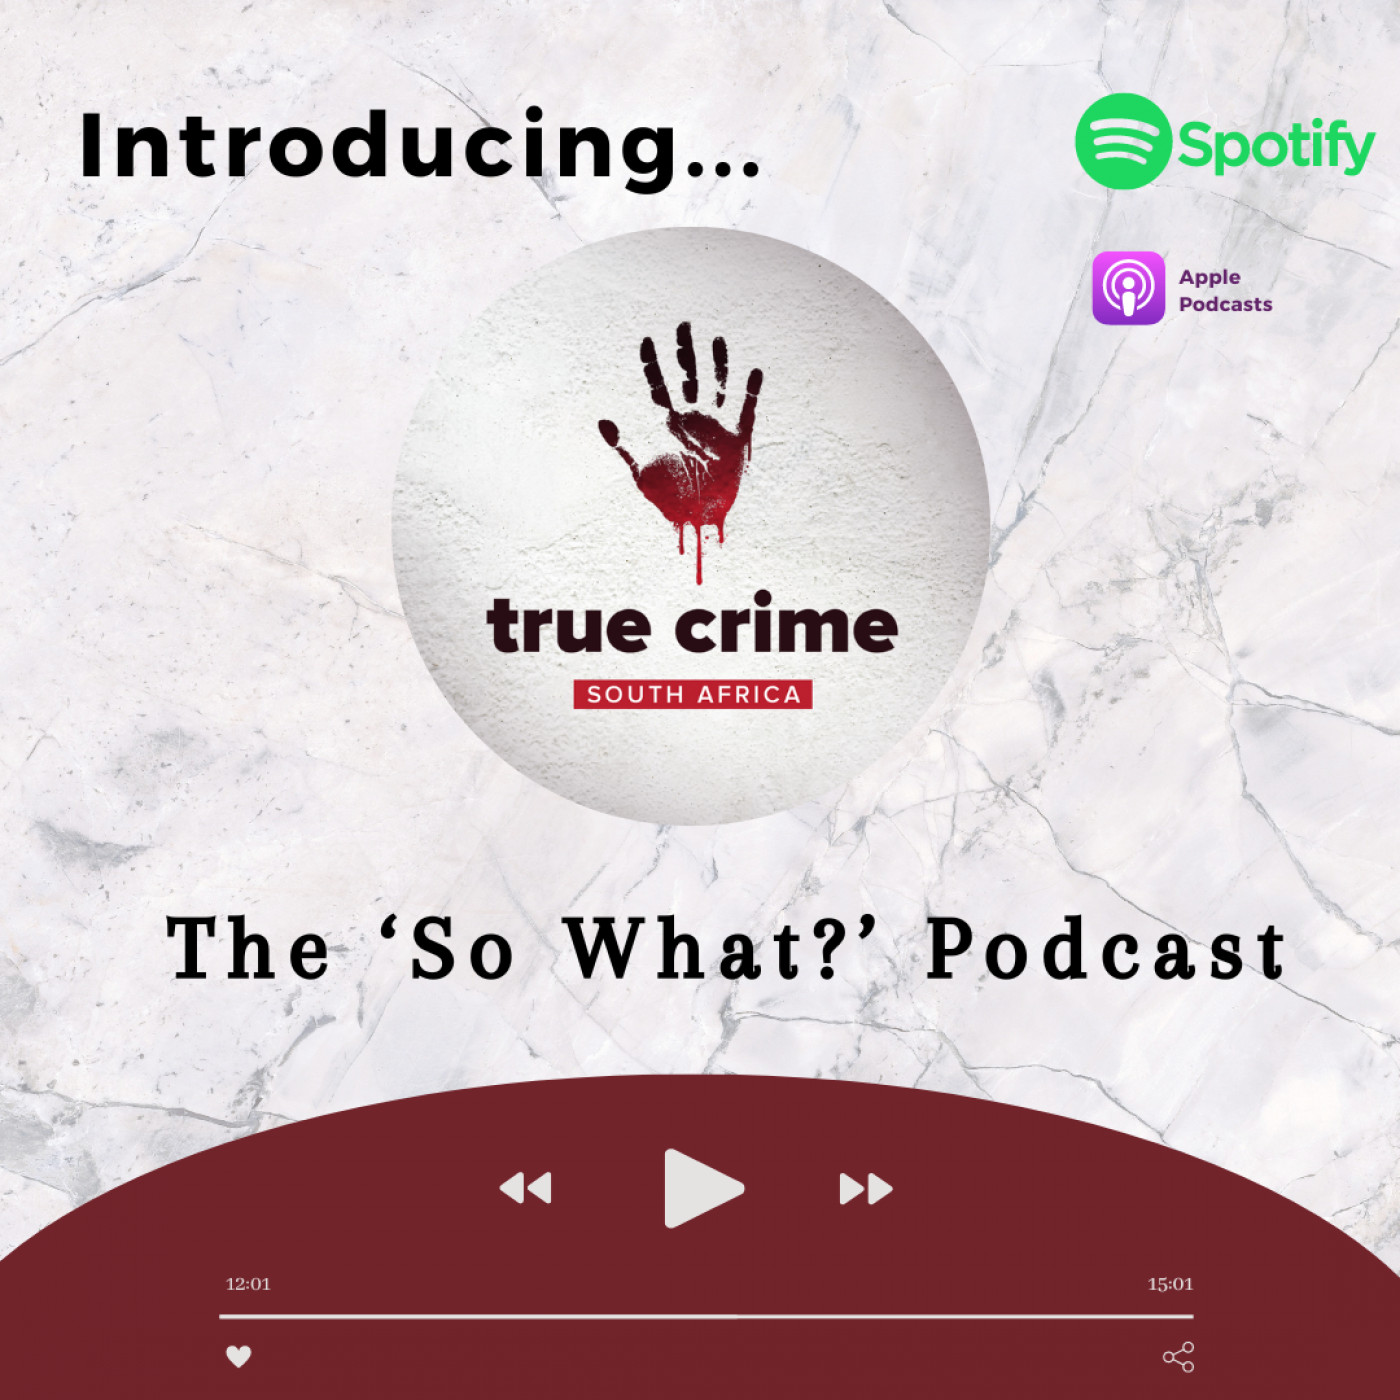 Introducing the ”So What?” Podcast